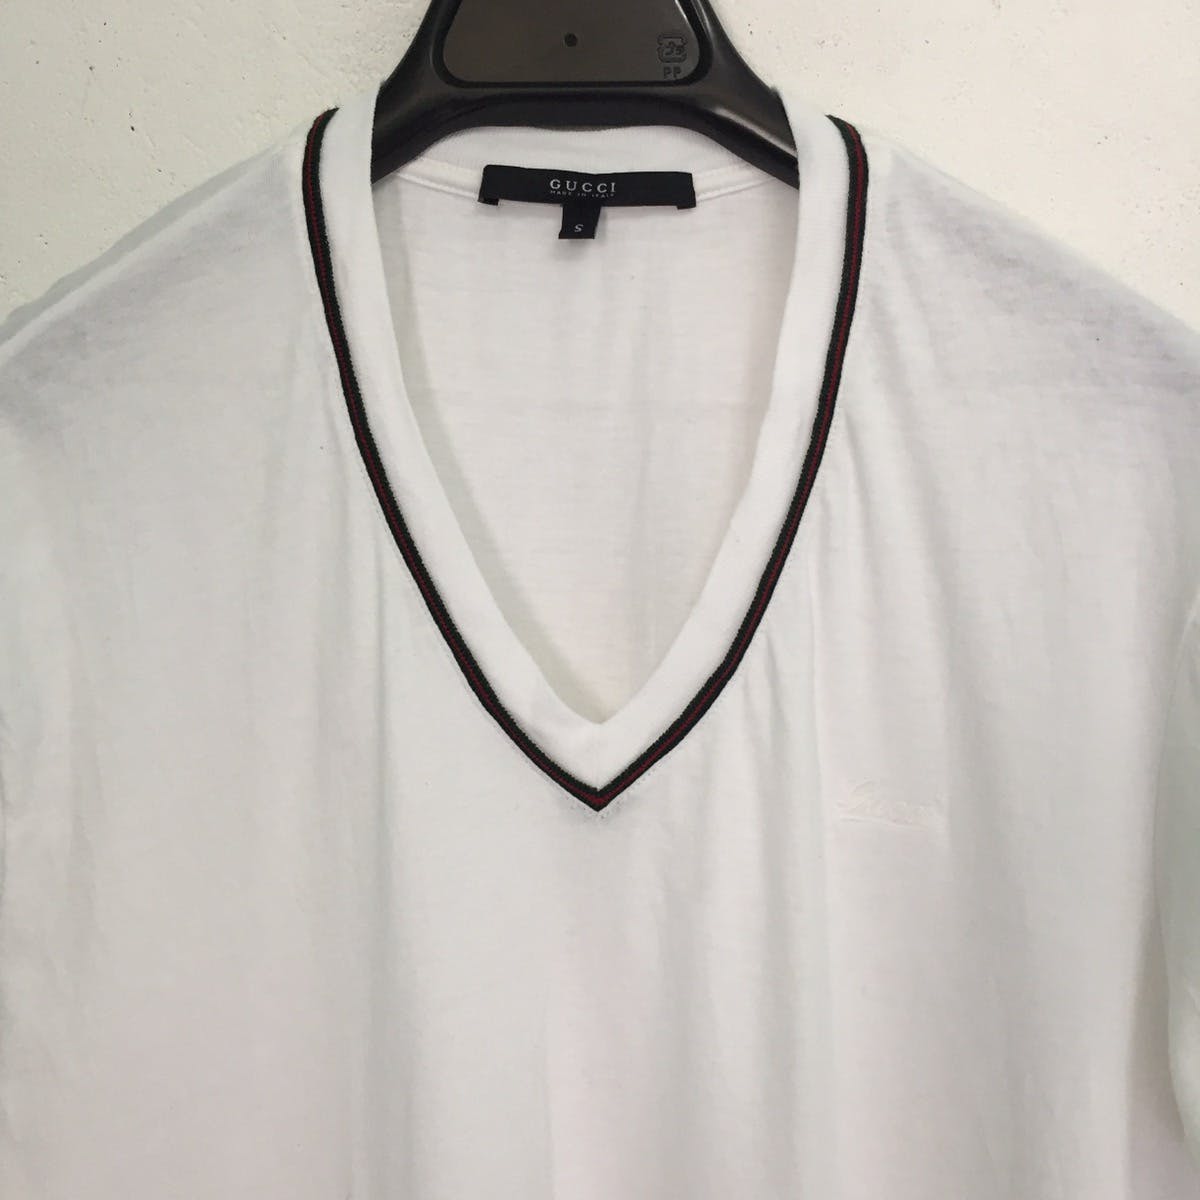 Gucci White Tee V Neck MADE IN ITALY - 2